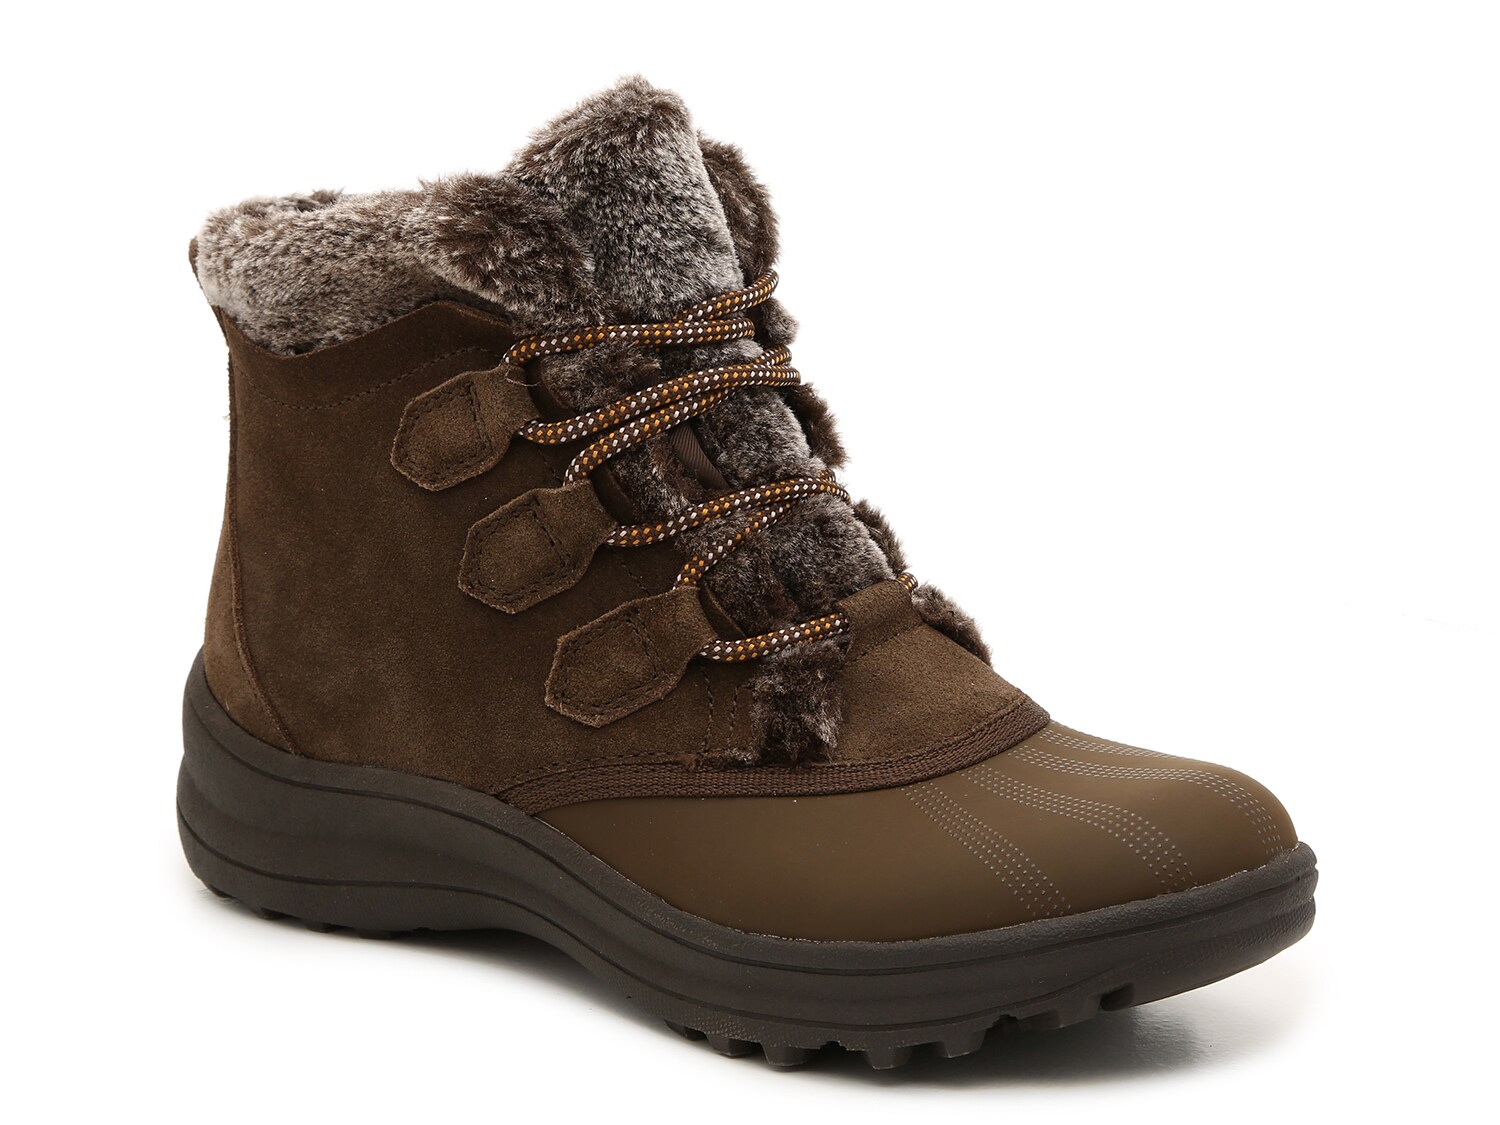 bear trap wedge boots